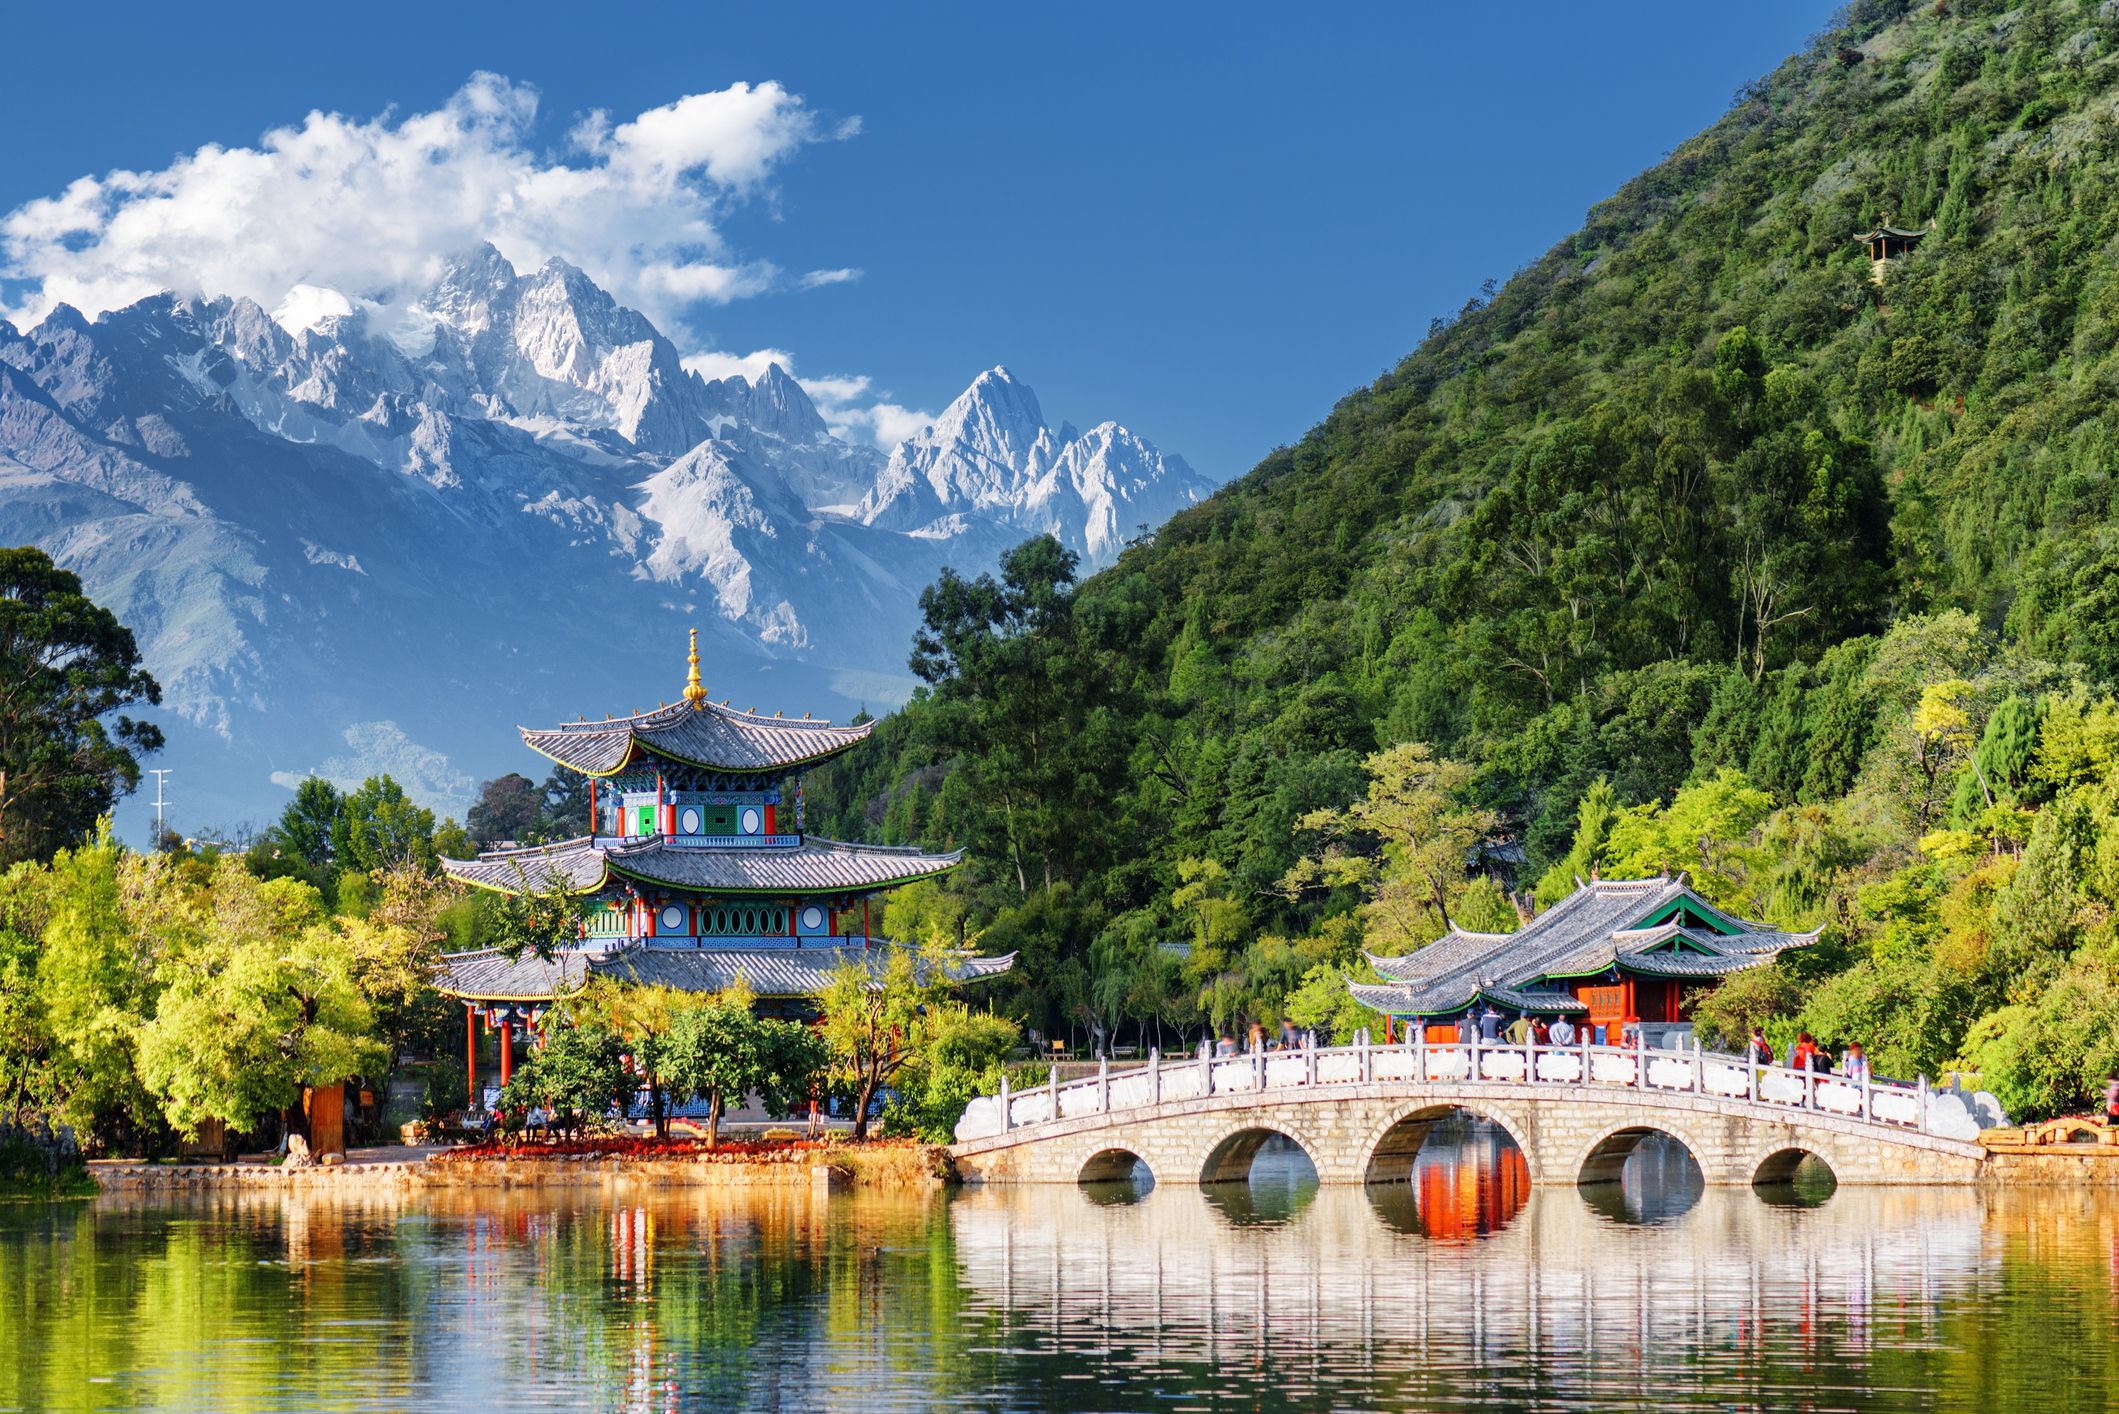 <p>Lijiang’s waterways are so beautiful and unique that they were named a UNESCO World Heritage Site back in 1997. But like other historic treasures on our list, you can enjoy the charms of the city’s past while staying in modern luxury hotels just a short drive away!&nbsp;</p>